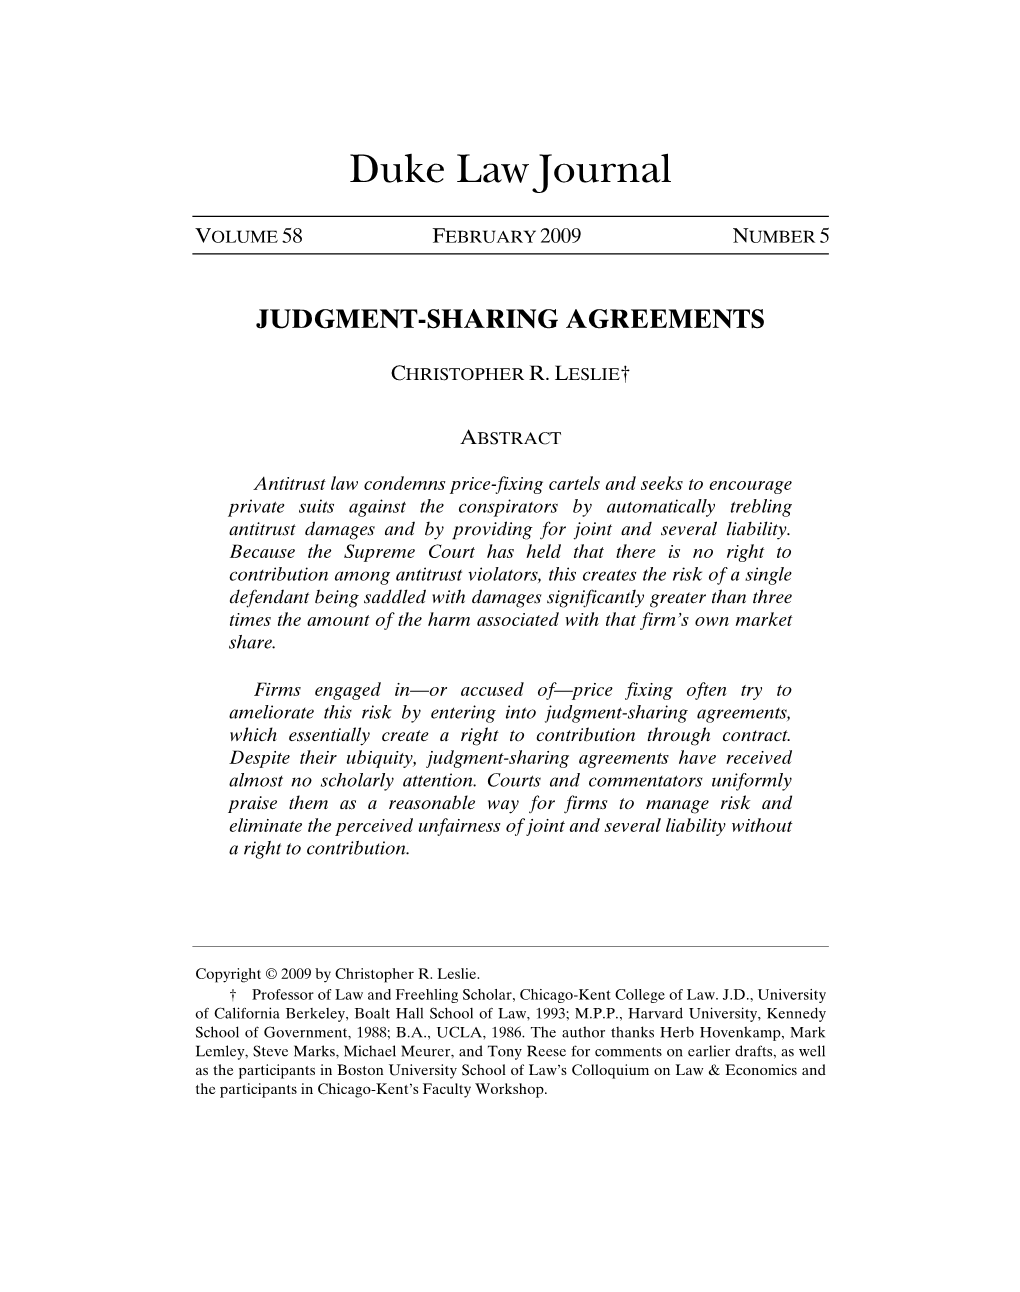 Judgment-Sharing Agreements